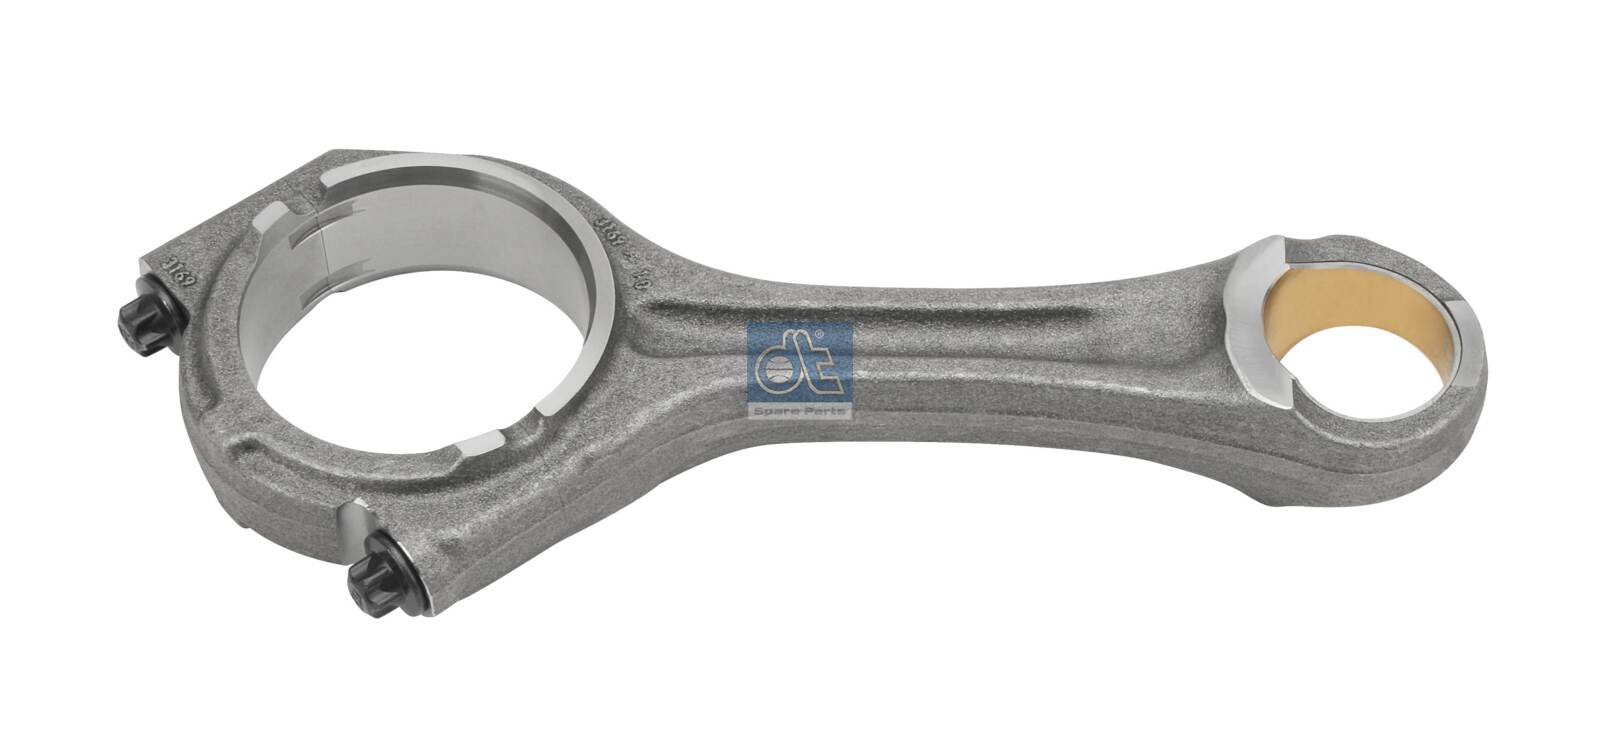 Connecting Rod - 3.11028 DT Spare Parts - 51.02400.6021, 51.02400.6030, 51.02400.6054